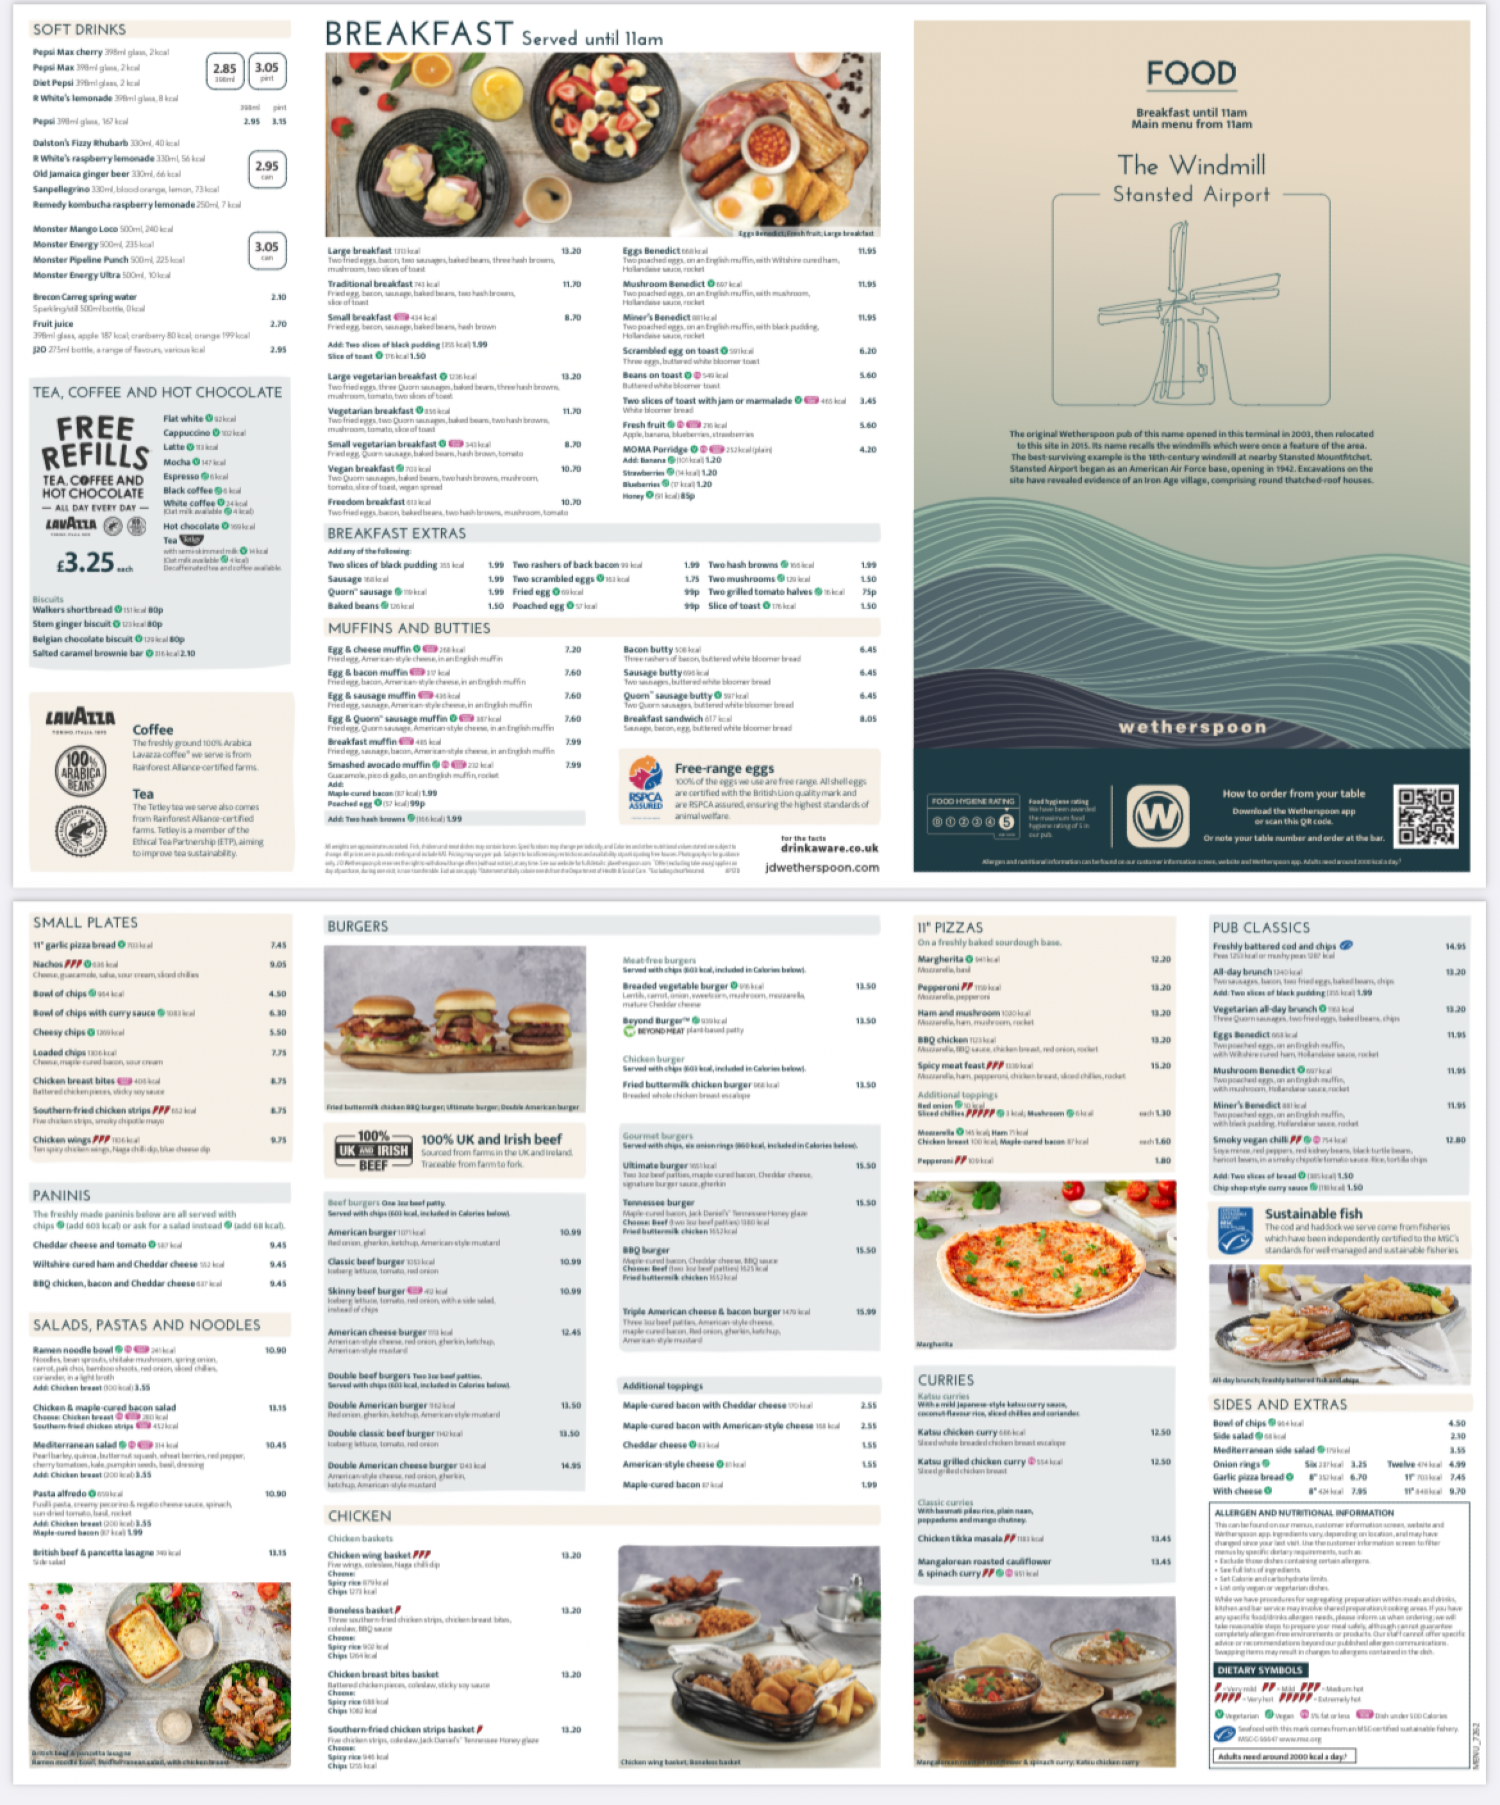 Takeaway Restaurant Menu Page - Wetherspoons – The Windmill - Stansted